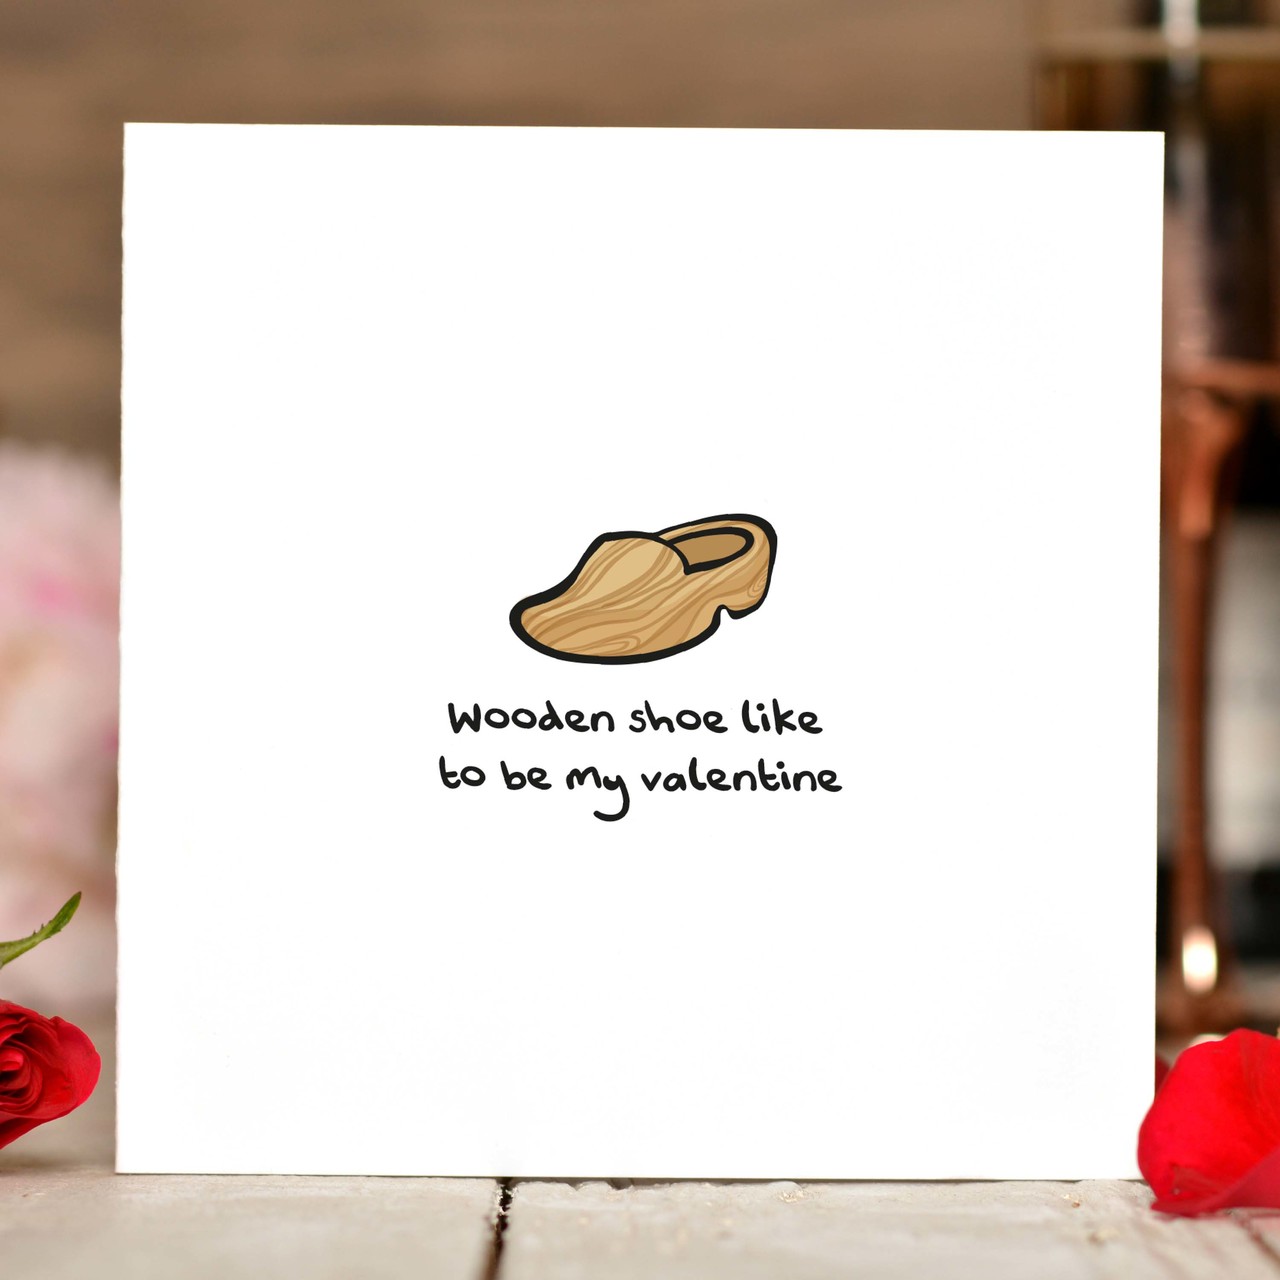 Wooden shoe like to be my valentine Card